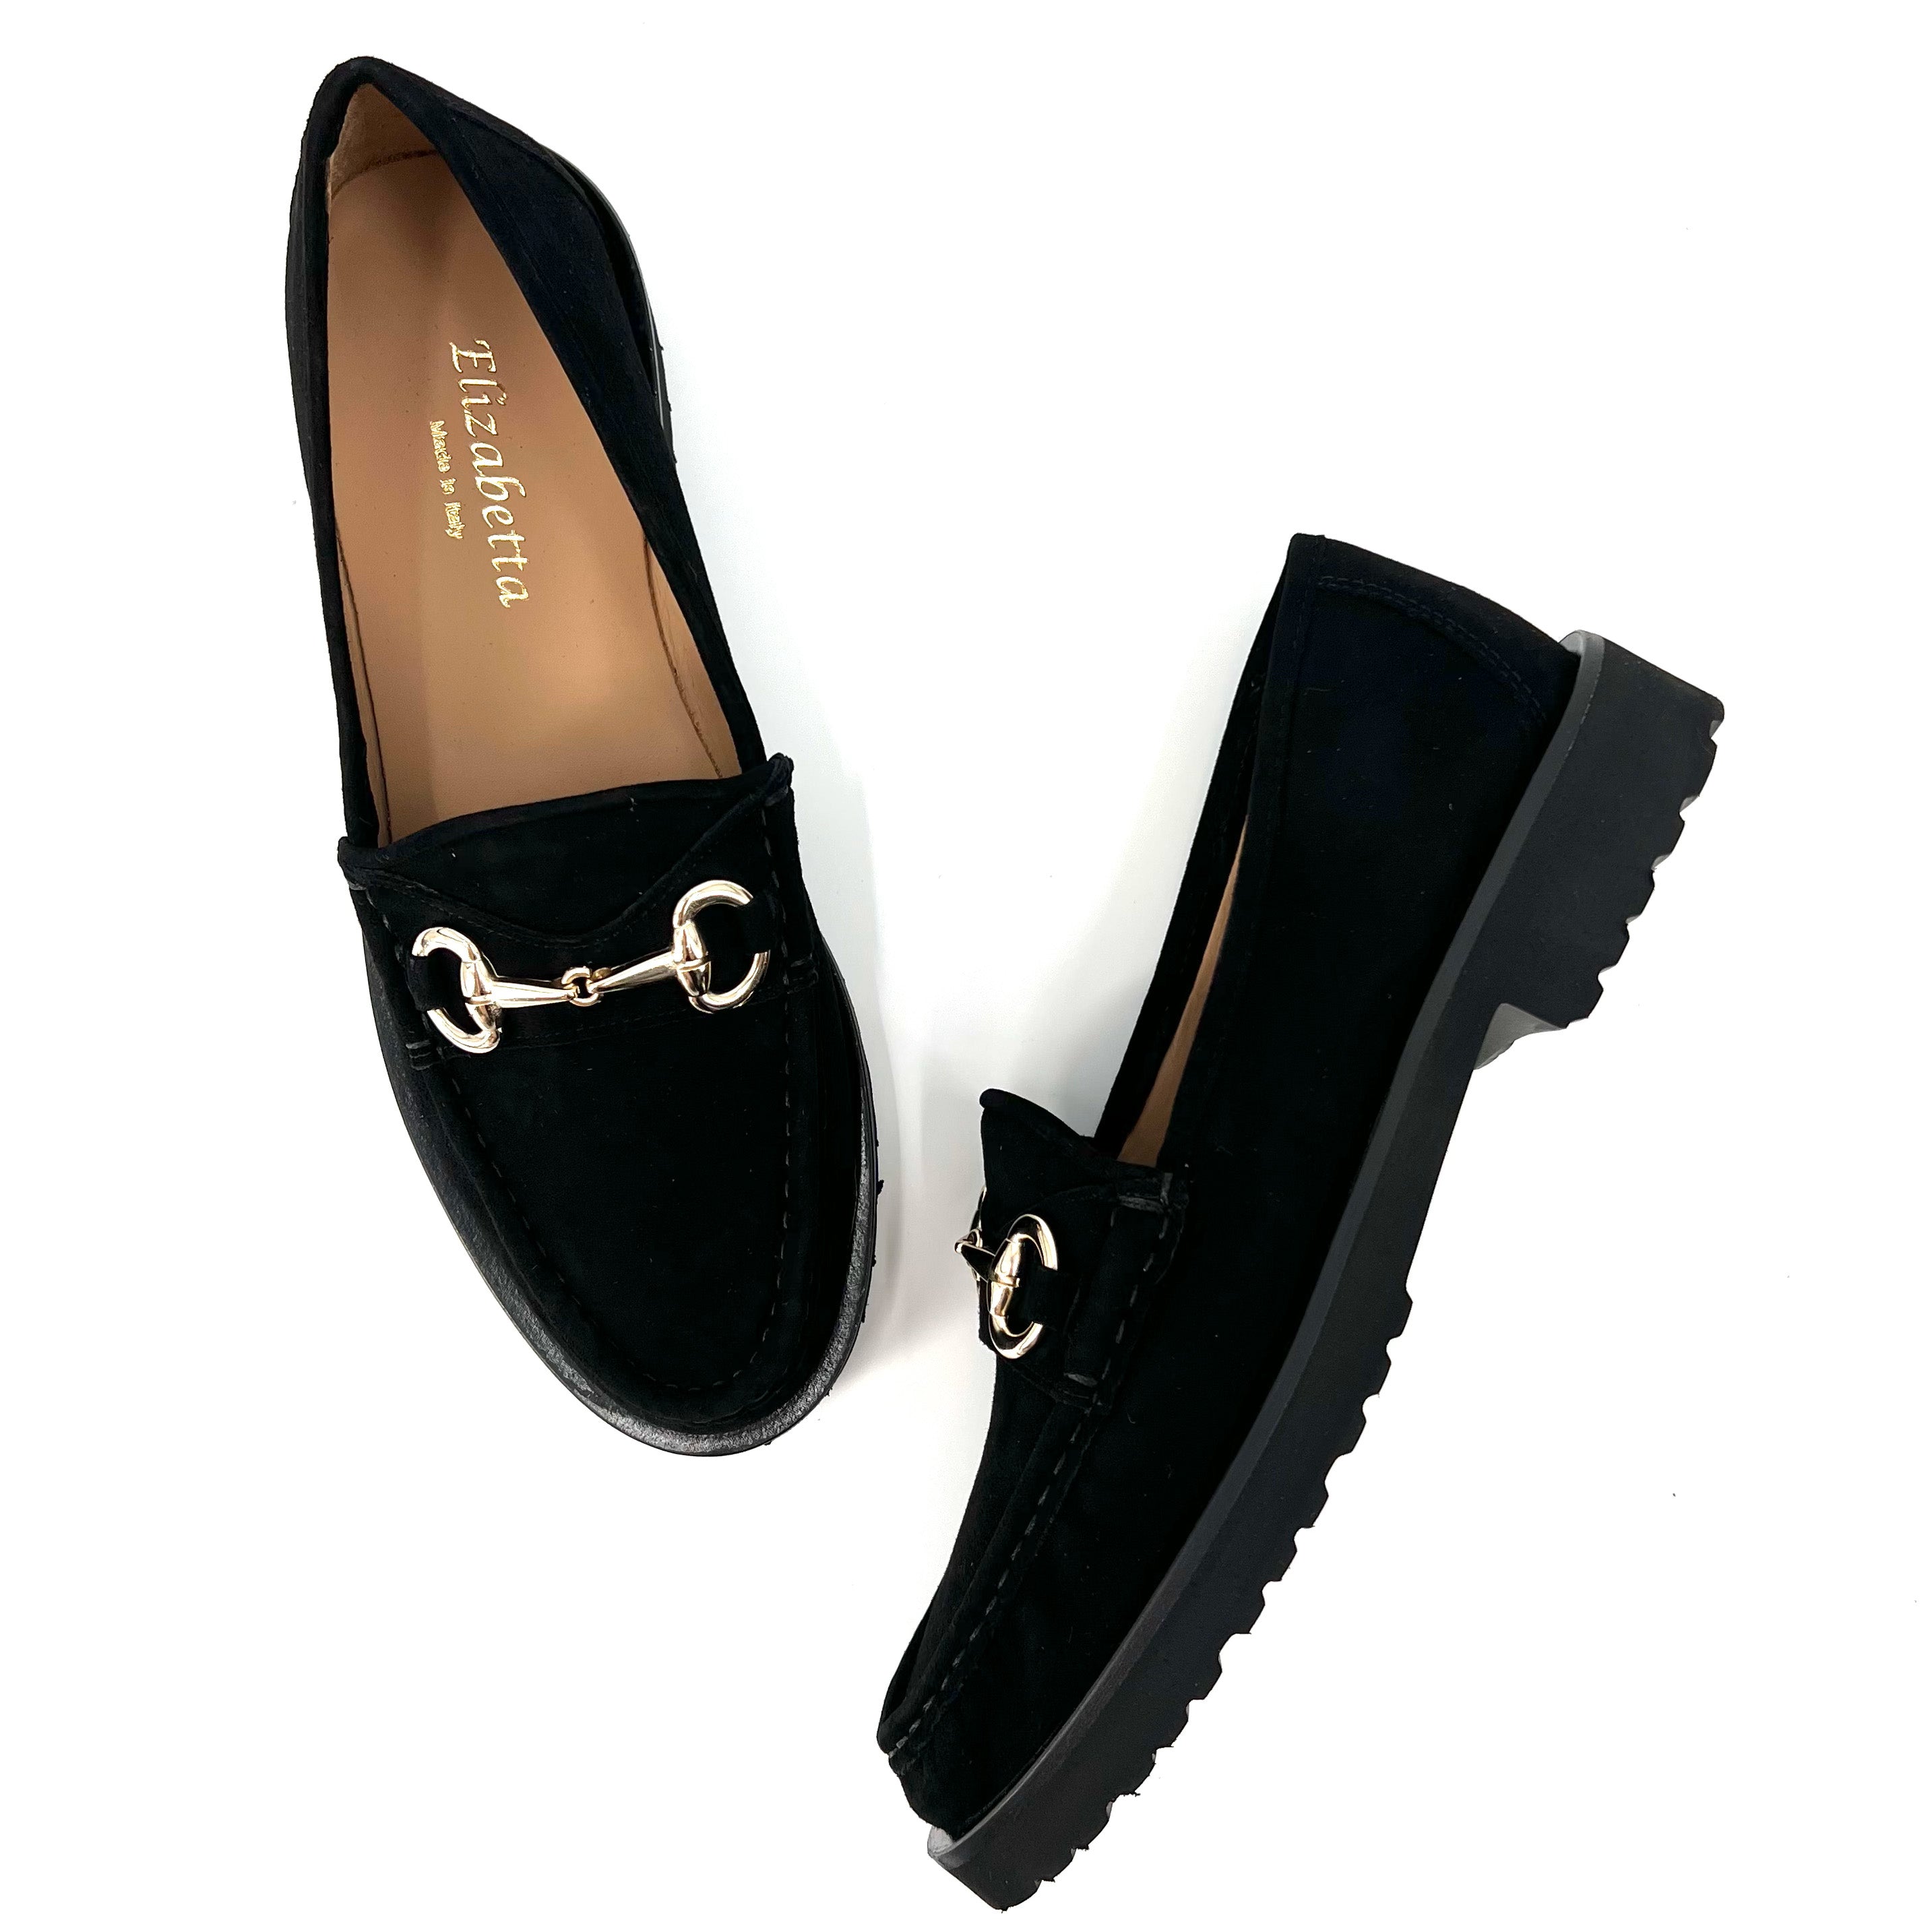 The Classic Bit Lug Loafer in Black